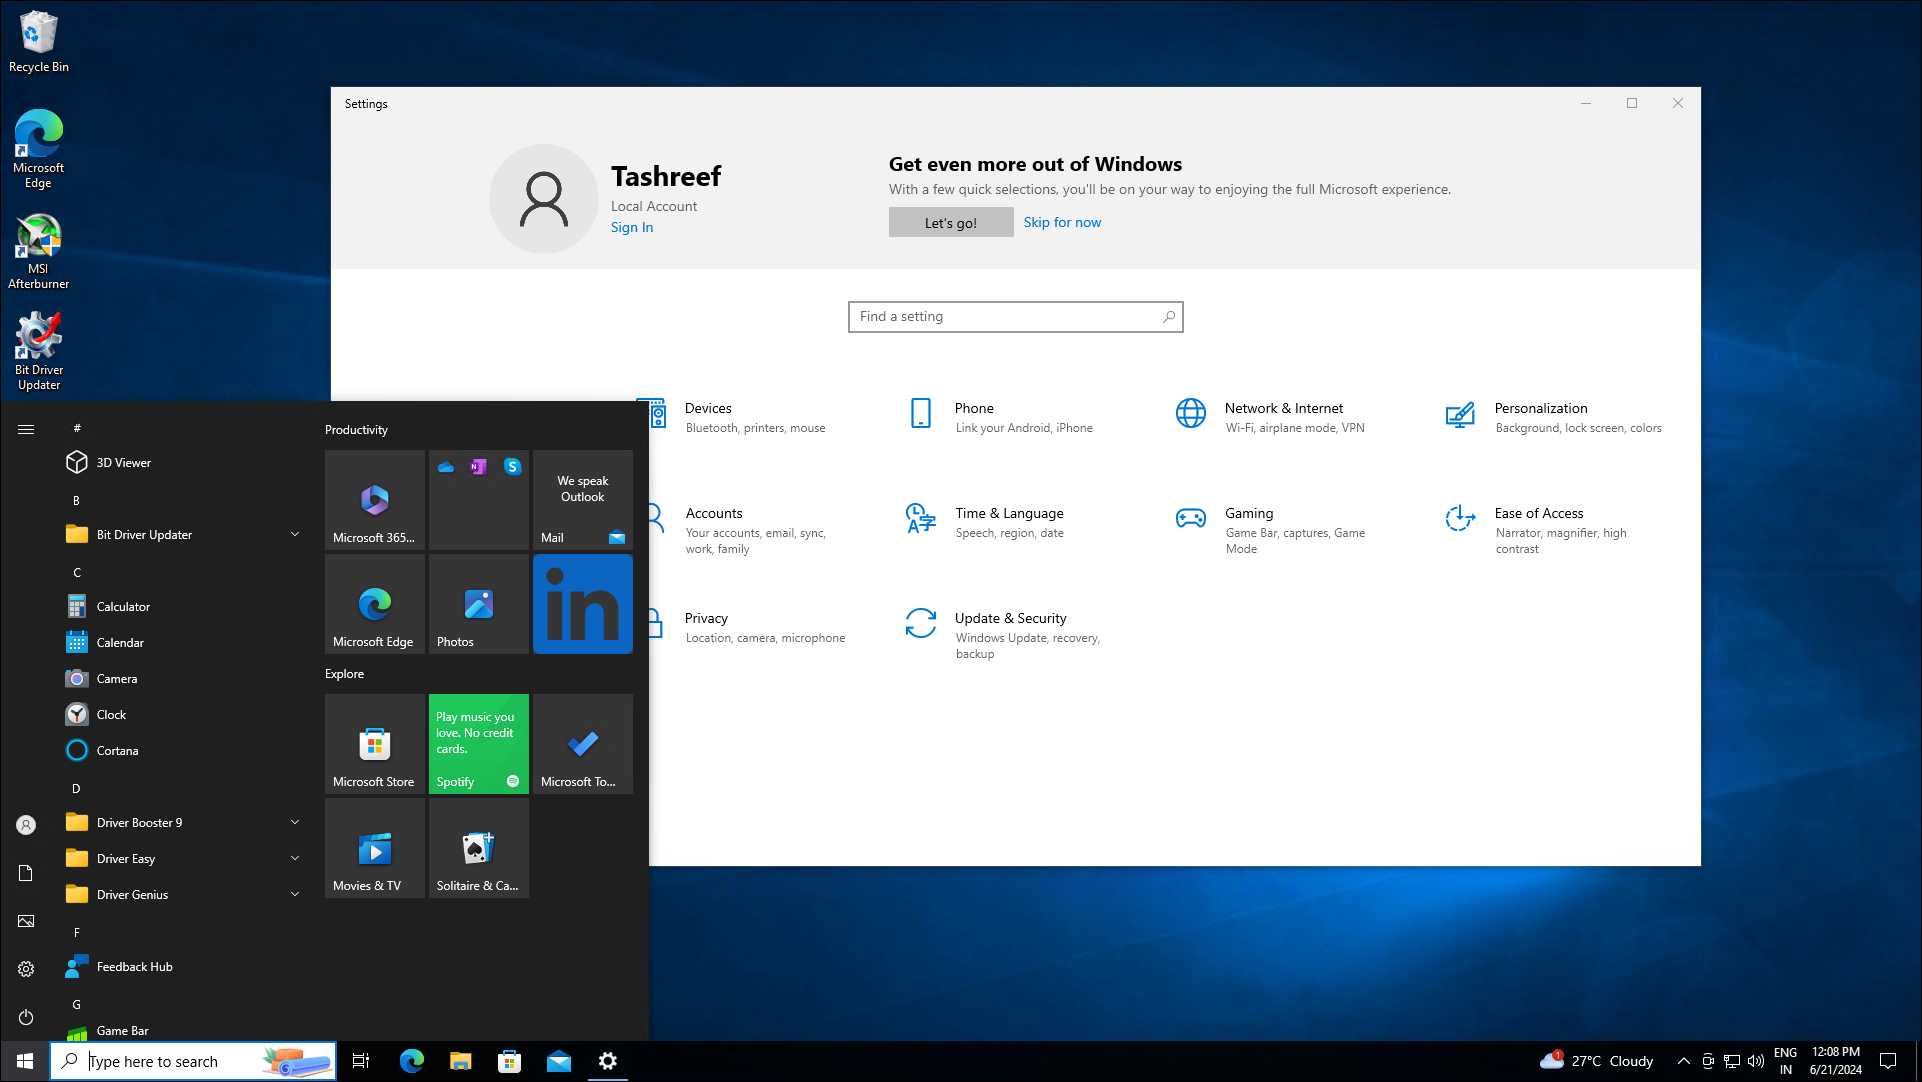 Windows 10 homescreen showing the settings app and the start menu open